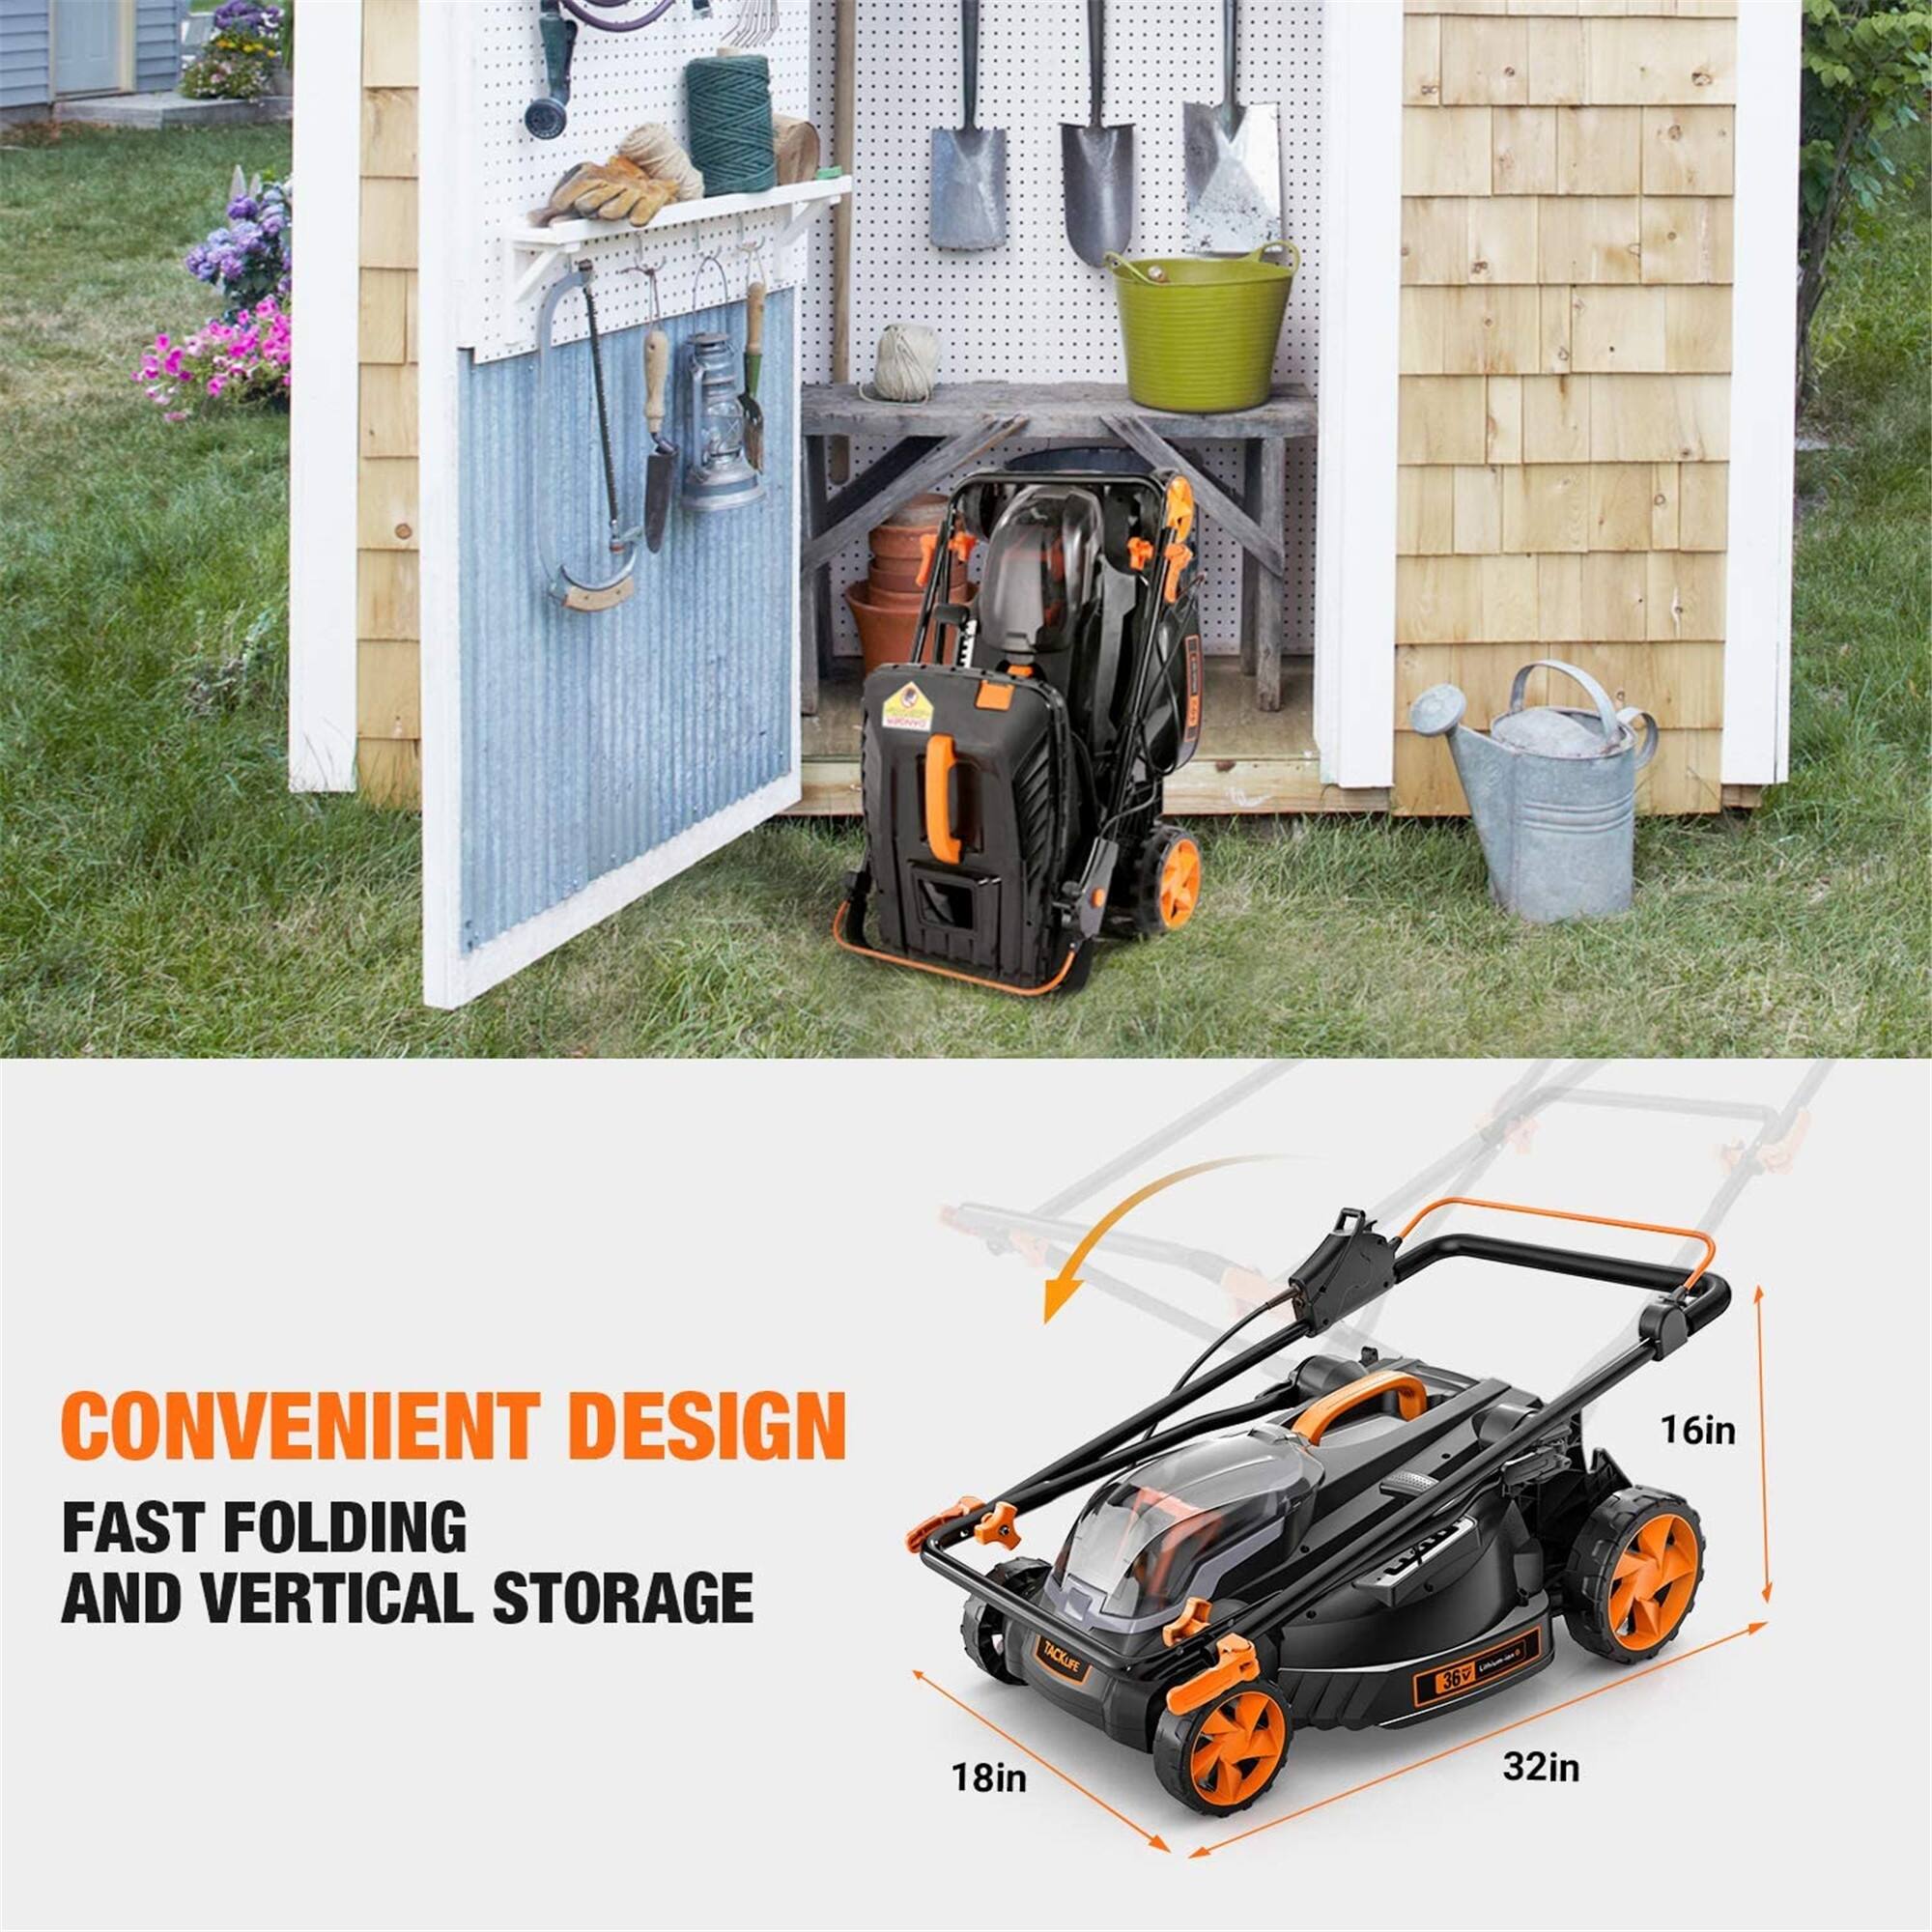 Cordless Lawn Mower, 16-Inch 40V Brushless Lawn Mower, 4.0Ah Battery, 98%  Clean Cutting Rate, 10.5Gal Grass Box - Bed Bath & Beyond - 33448728